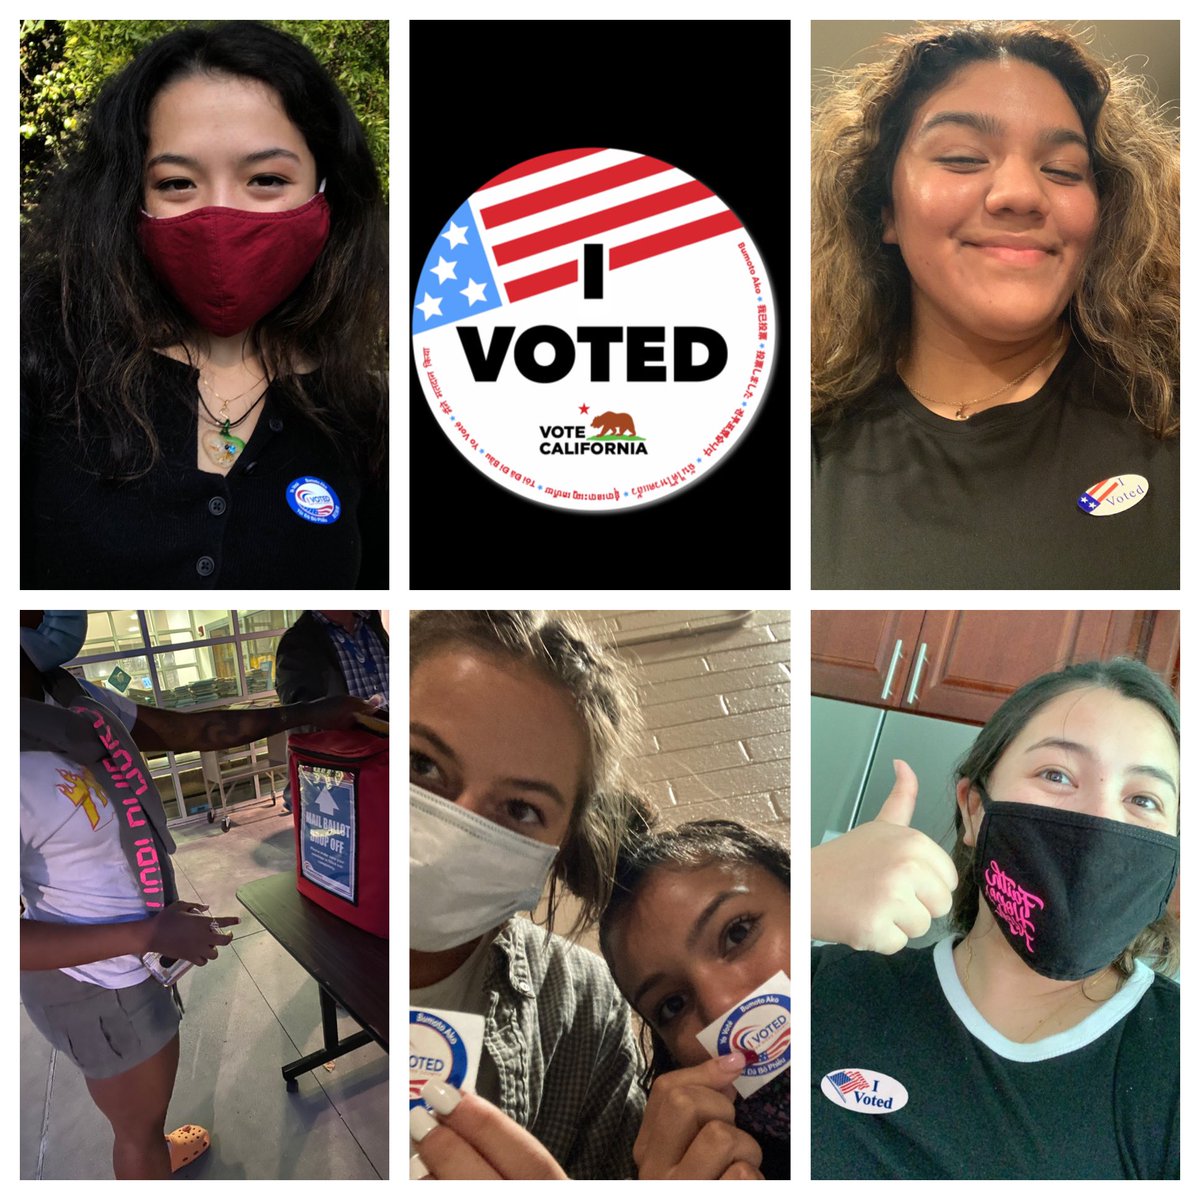 We did a thing today! #yourvoice #yourvote #Election2020  Make your voice heard! Proud of our first time voters for exercising their right to #VOTE @sdmesaathletics @sdmesacollege